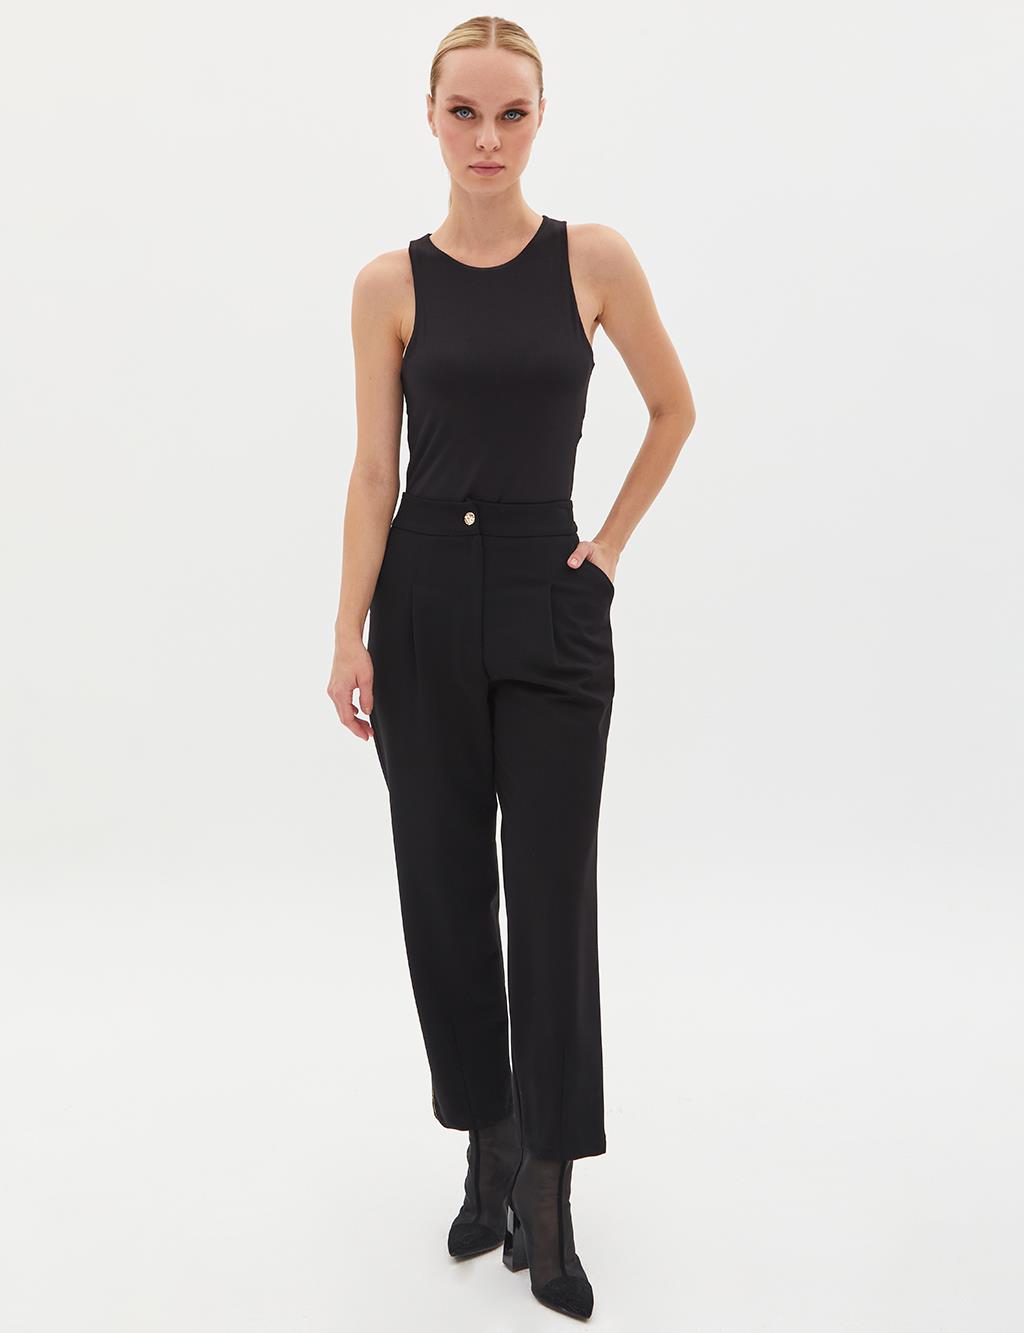 High Waist Ironed Trousers Black